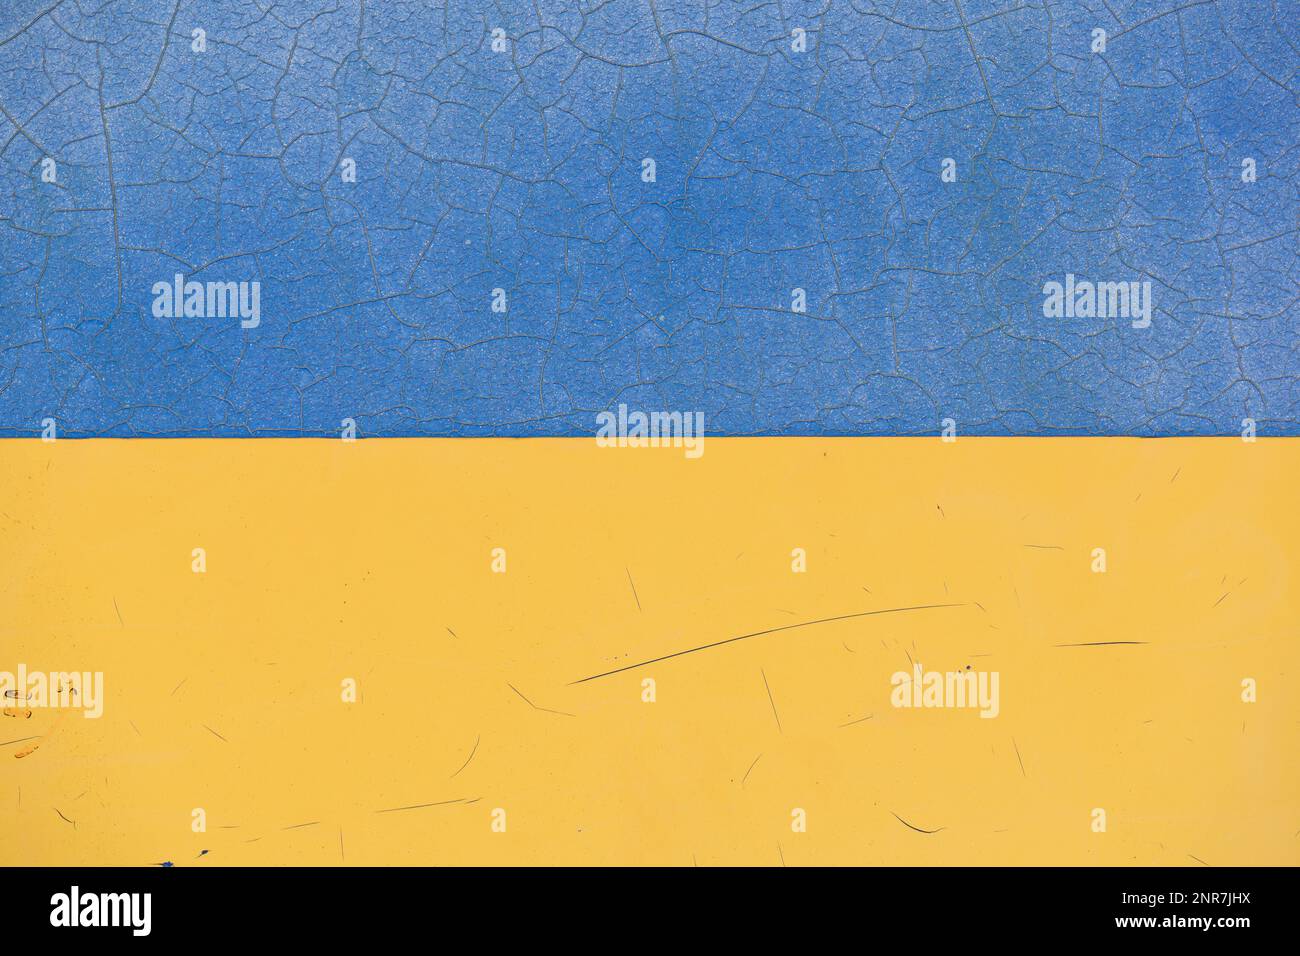 Ukraine flag with cracked texture. Blue and yellow background. Stock Photo